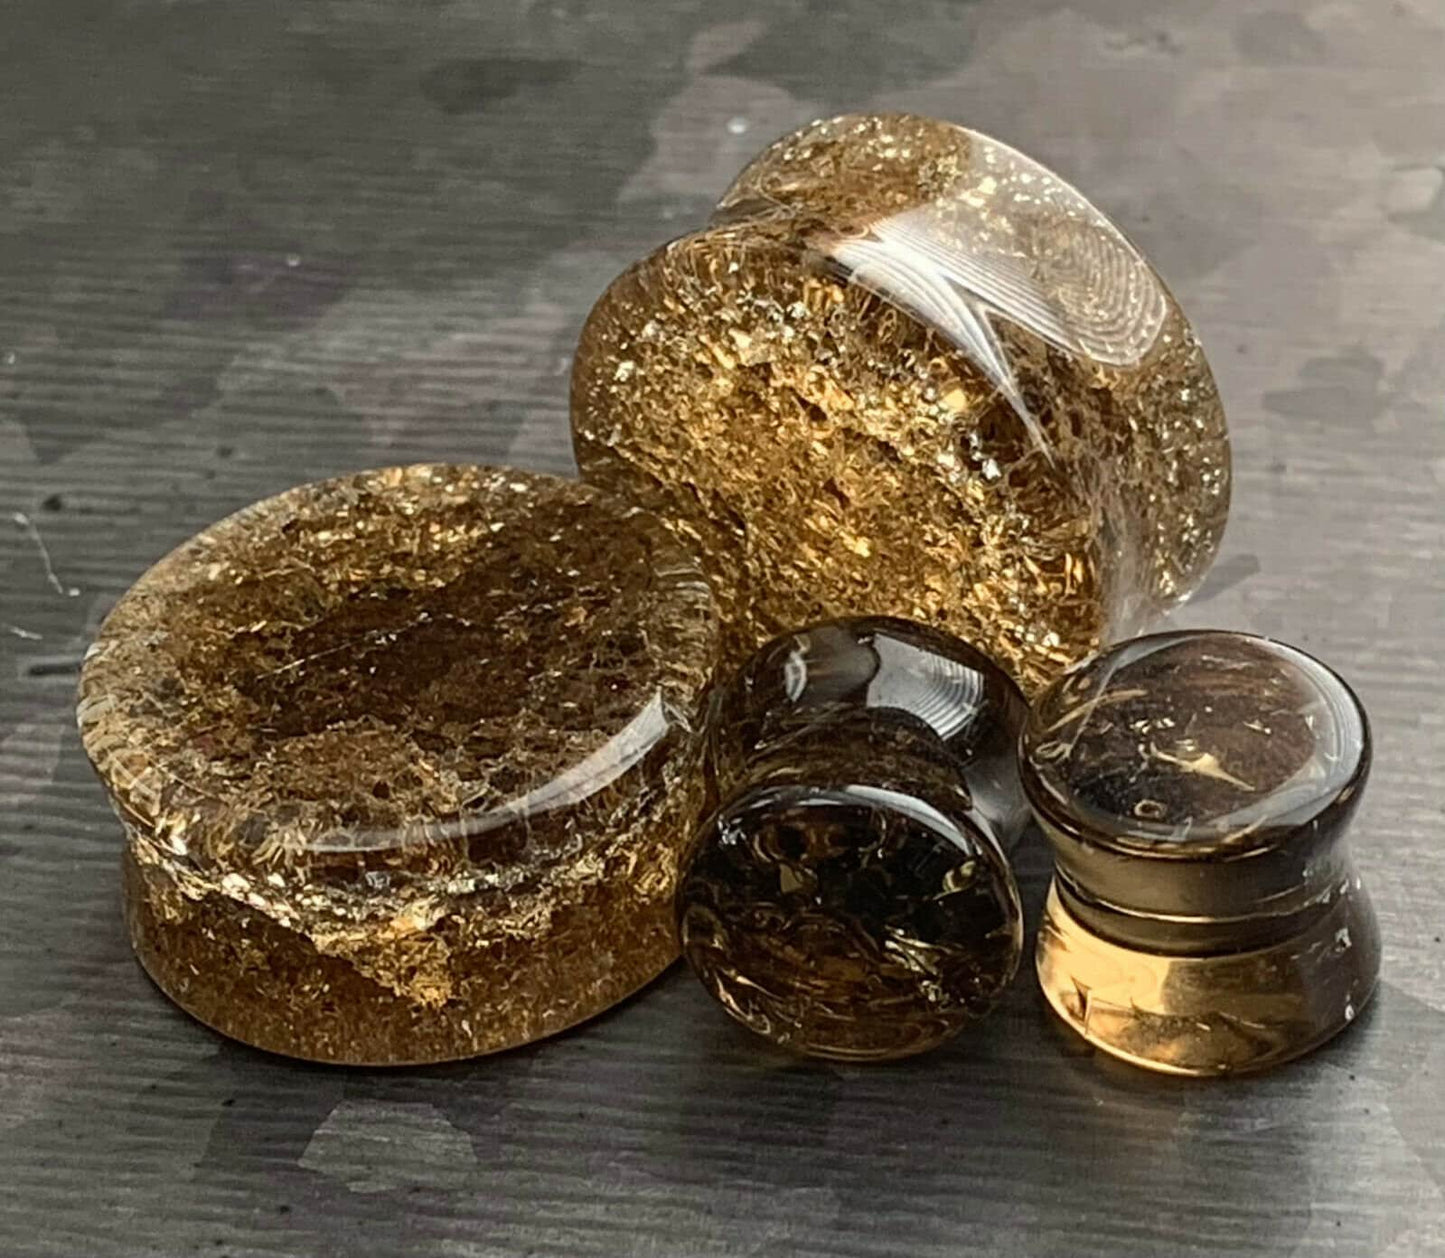 PAIR of Stunning Cracked Golden Black Glass Double Flare Plugs - Gauges 0g (8mm) through 7/8" (22mm) available!